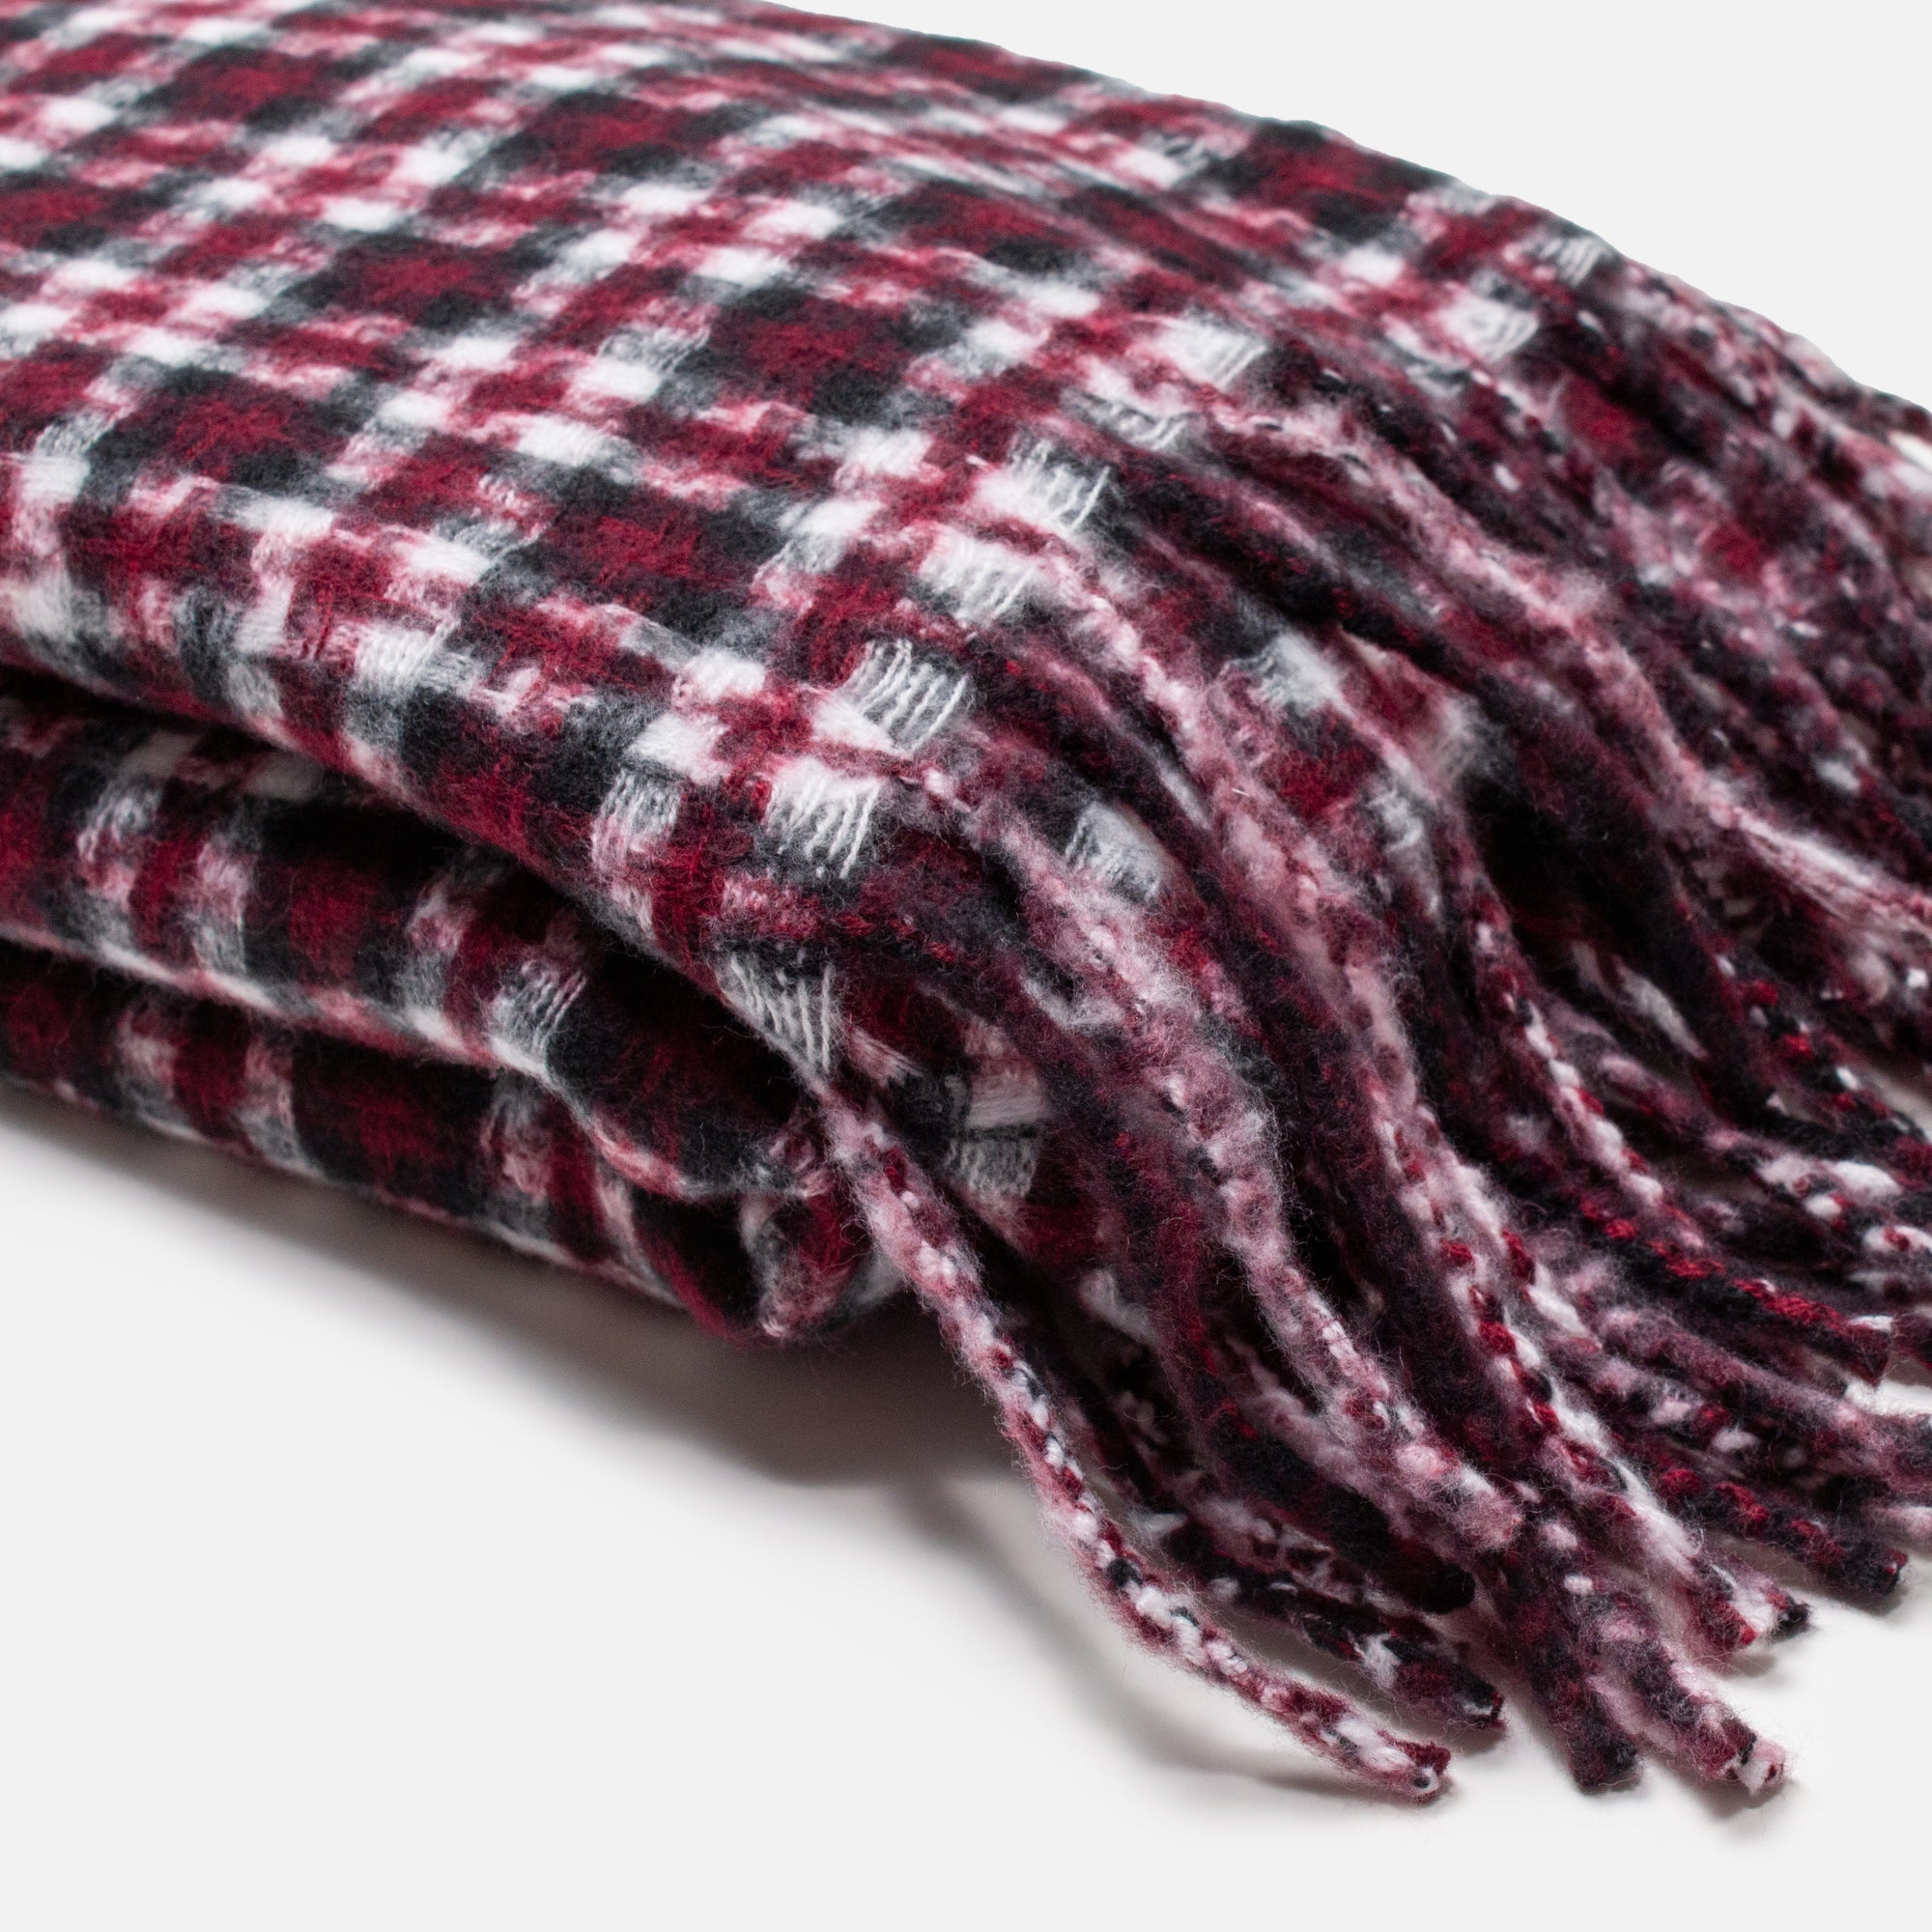 Black and white wine red checkered scarf